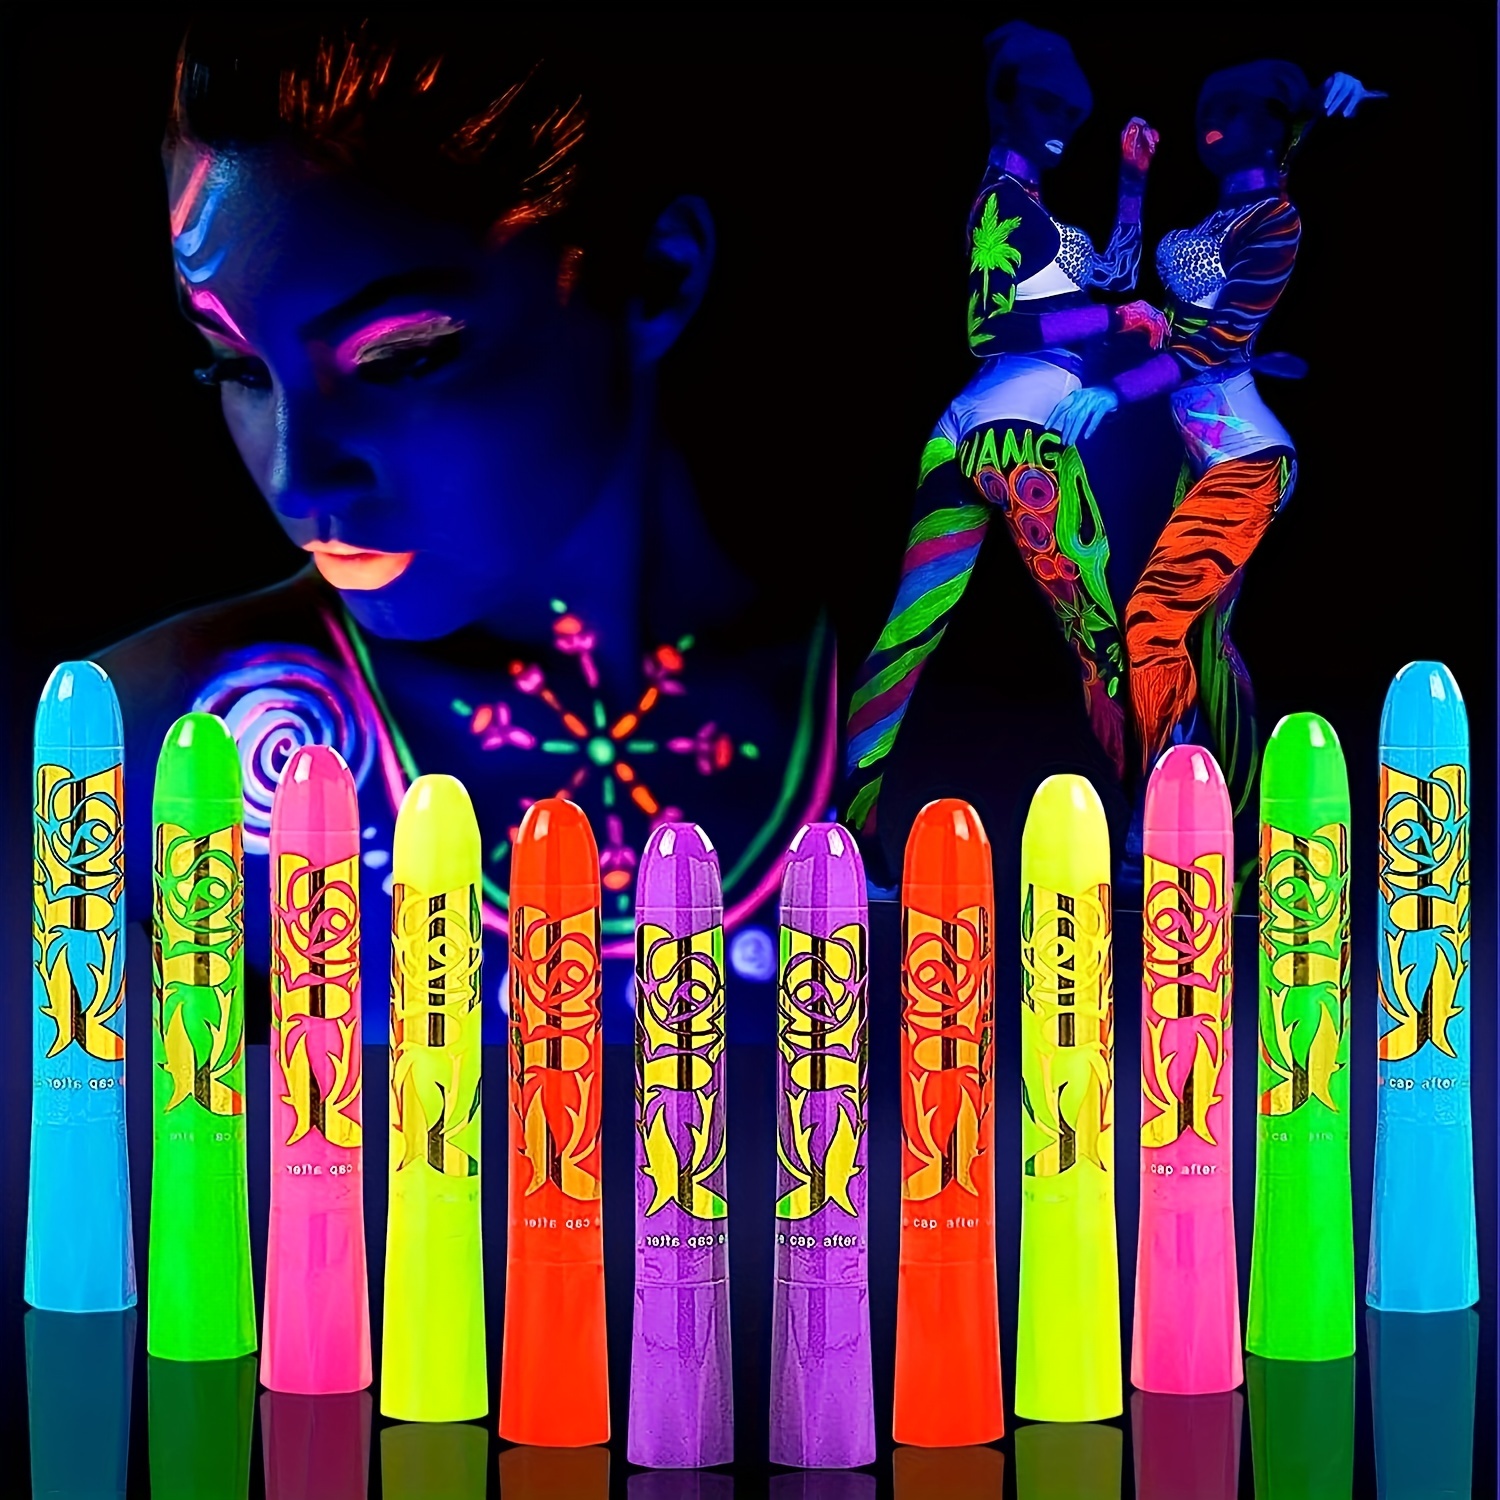  Halloween 16 Pcs Face Paint With Stencils, SayingArt Glow In  Blacklight Face / Body Painting Makeup Kit For Kids, UV Neon Fluorescent  Face Paint Crayons Washable For Rave Glow Party Eyeblack